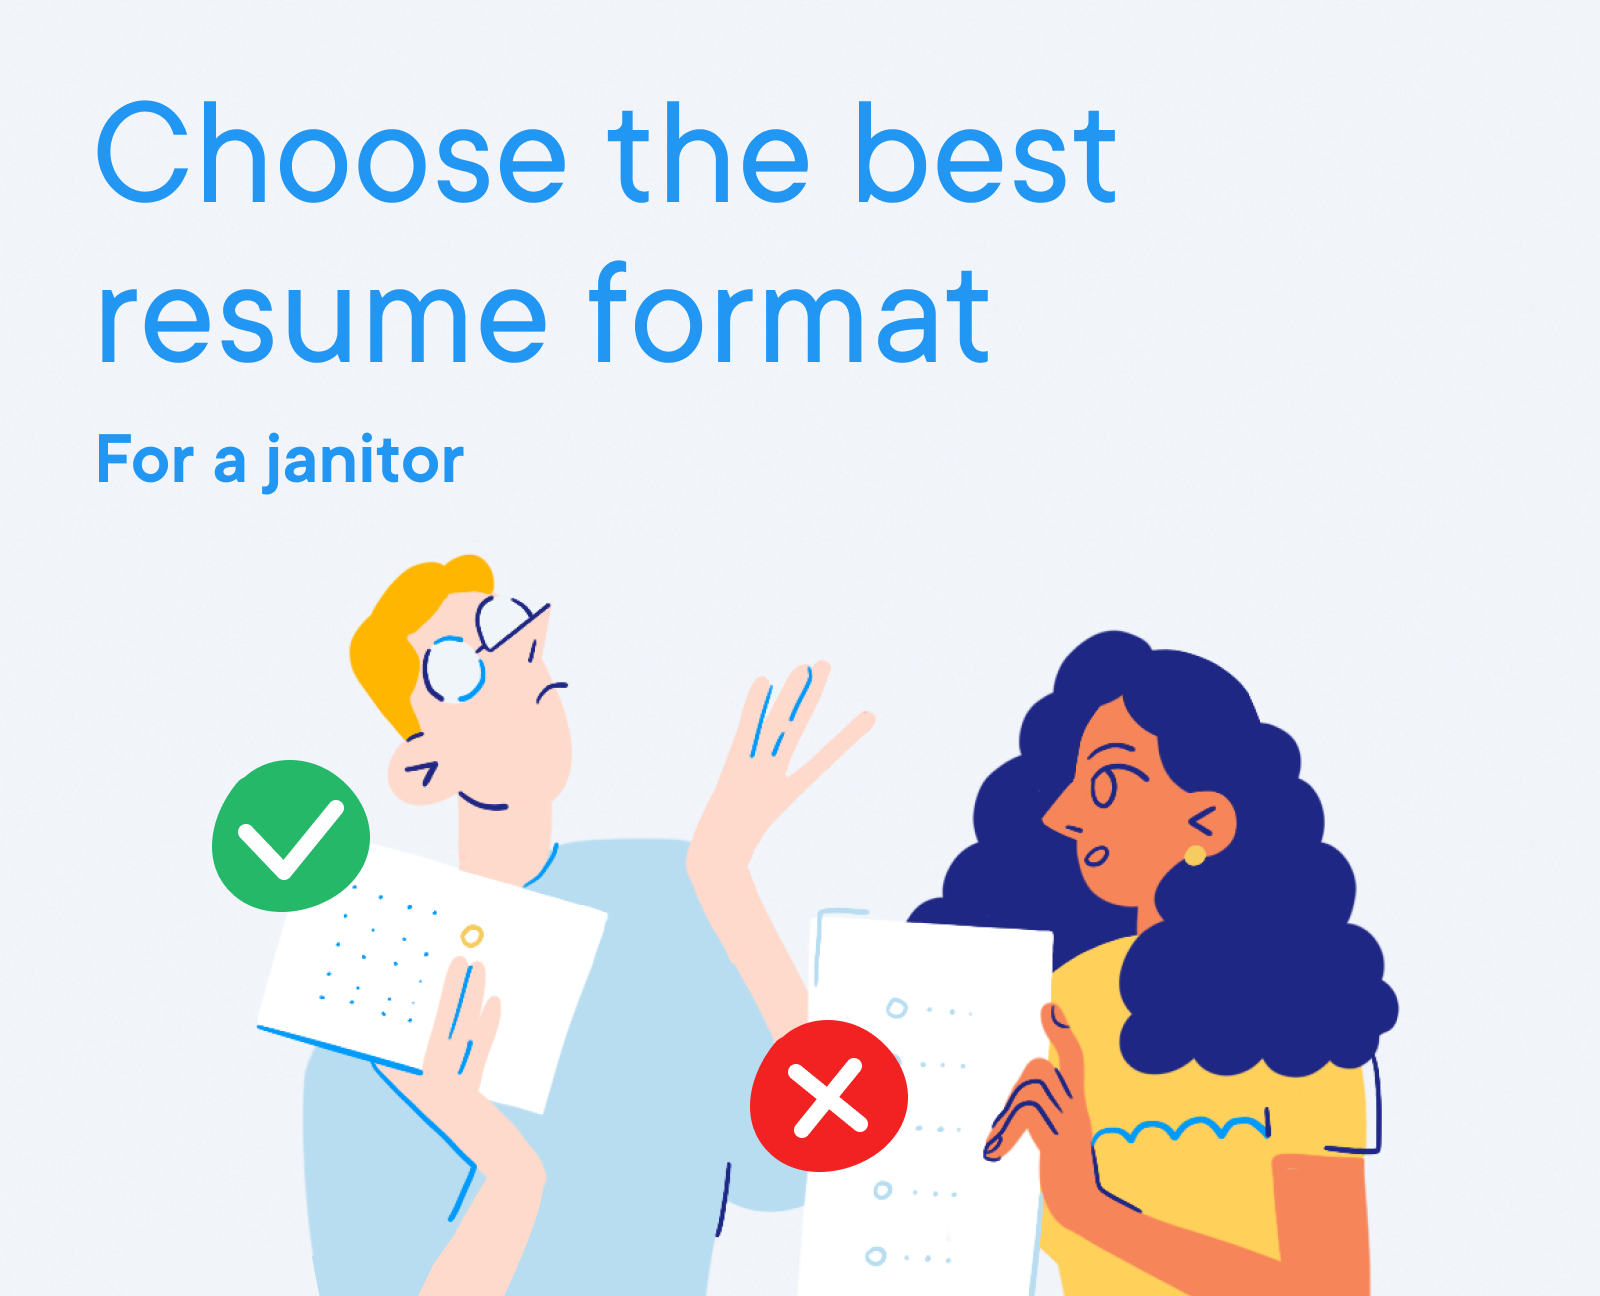 Janitor - Choose the best resume format for a janitor